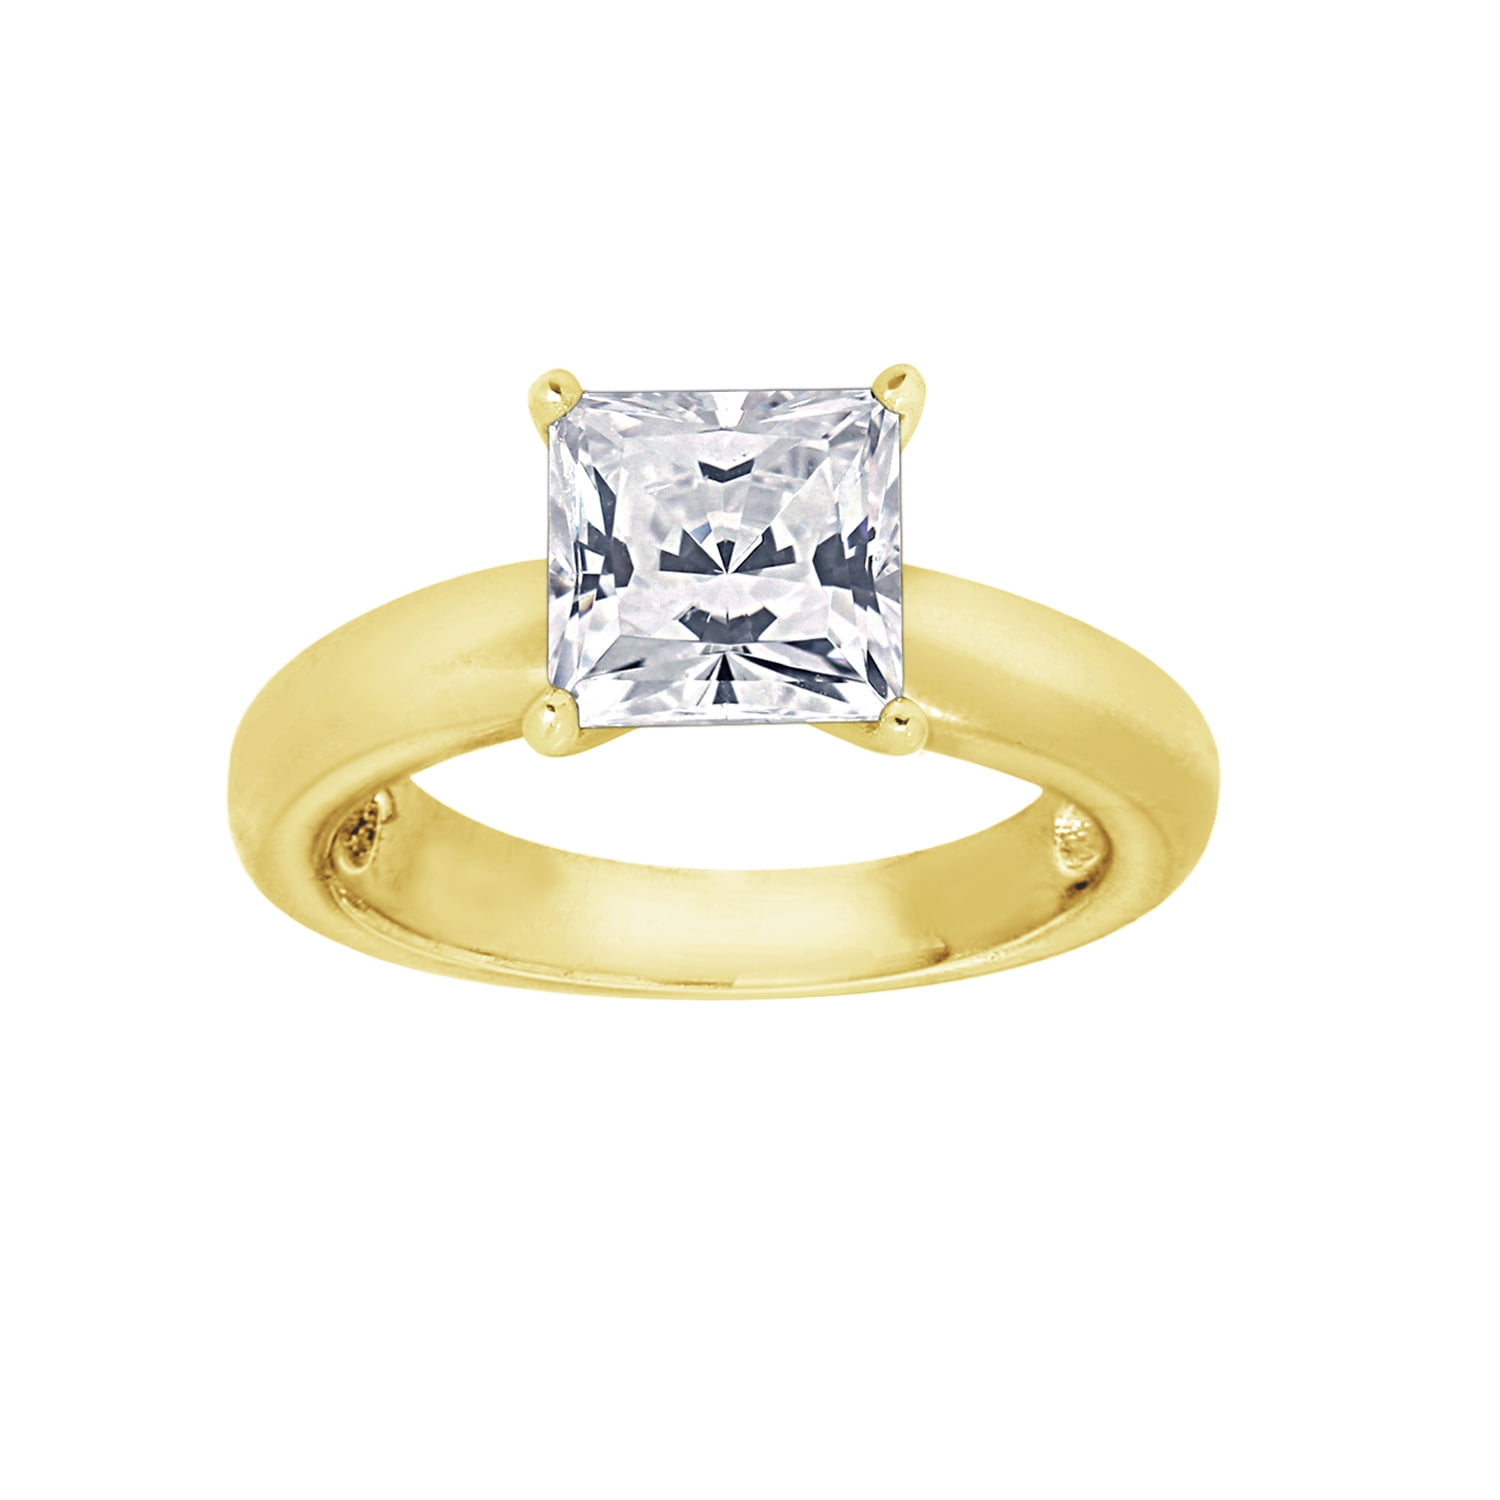 Yellow Gold-Plated or Platinum-Plated Sterling Silver Princess Cut Cubic Zirconia Bridal Ring Set